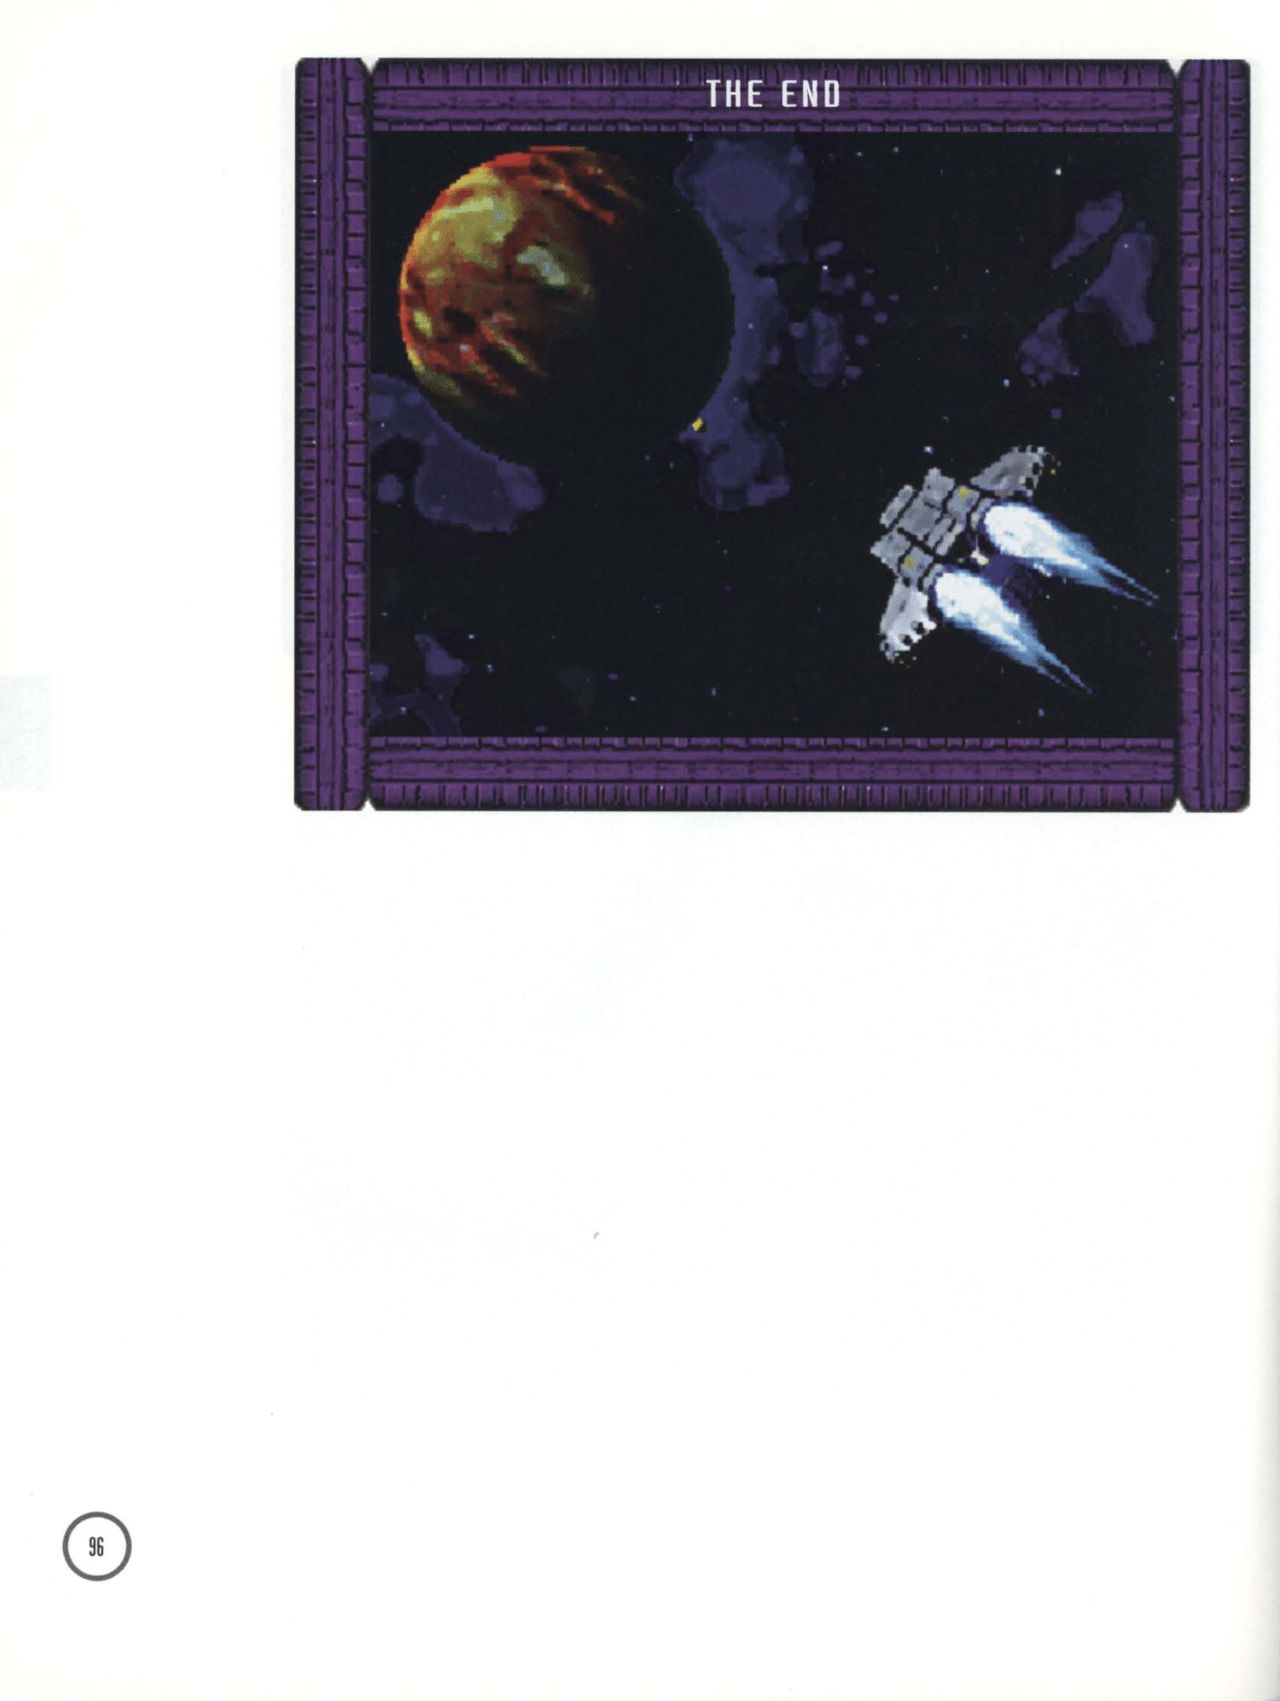 BioForge (PC (DOS/Windows)) Strategy Guide 96